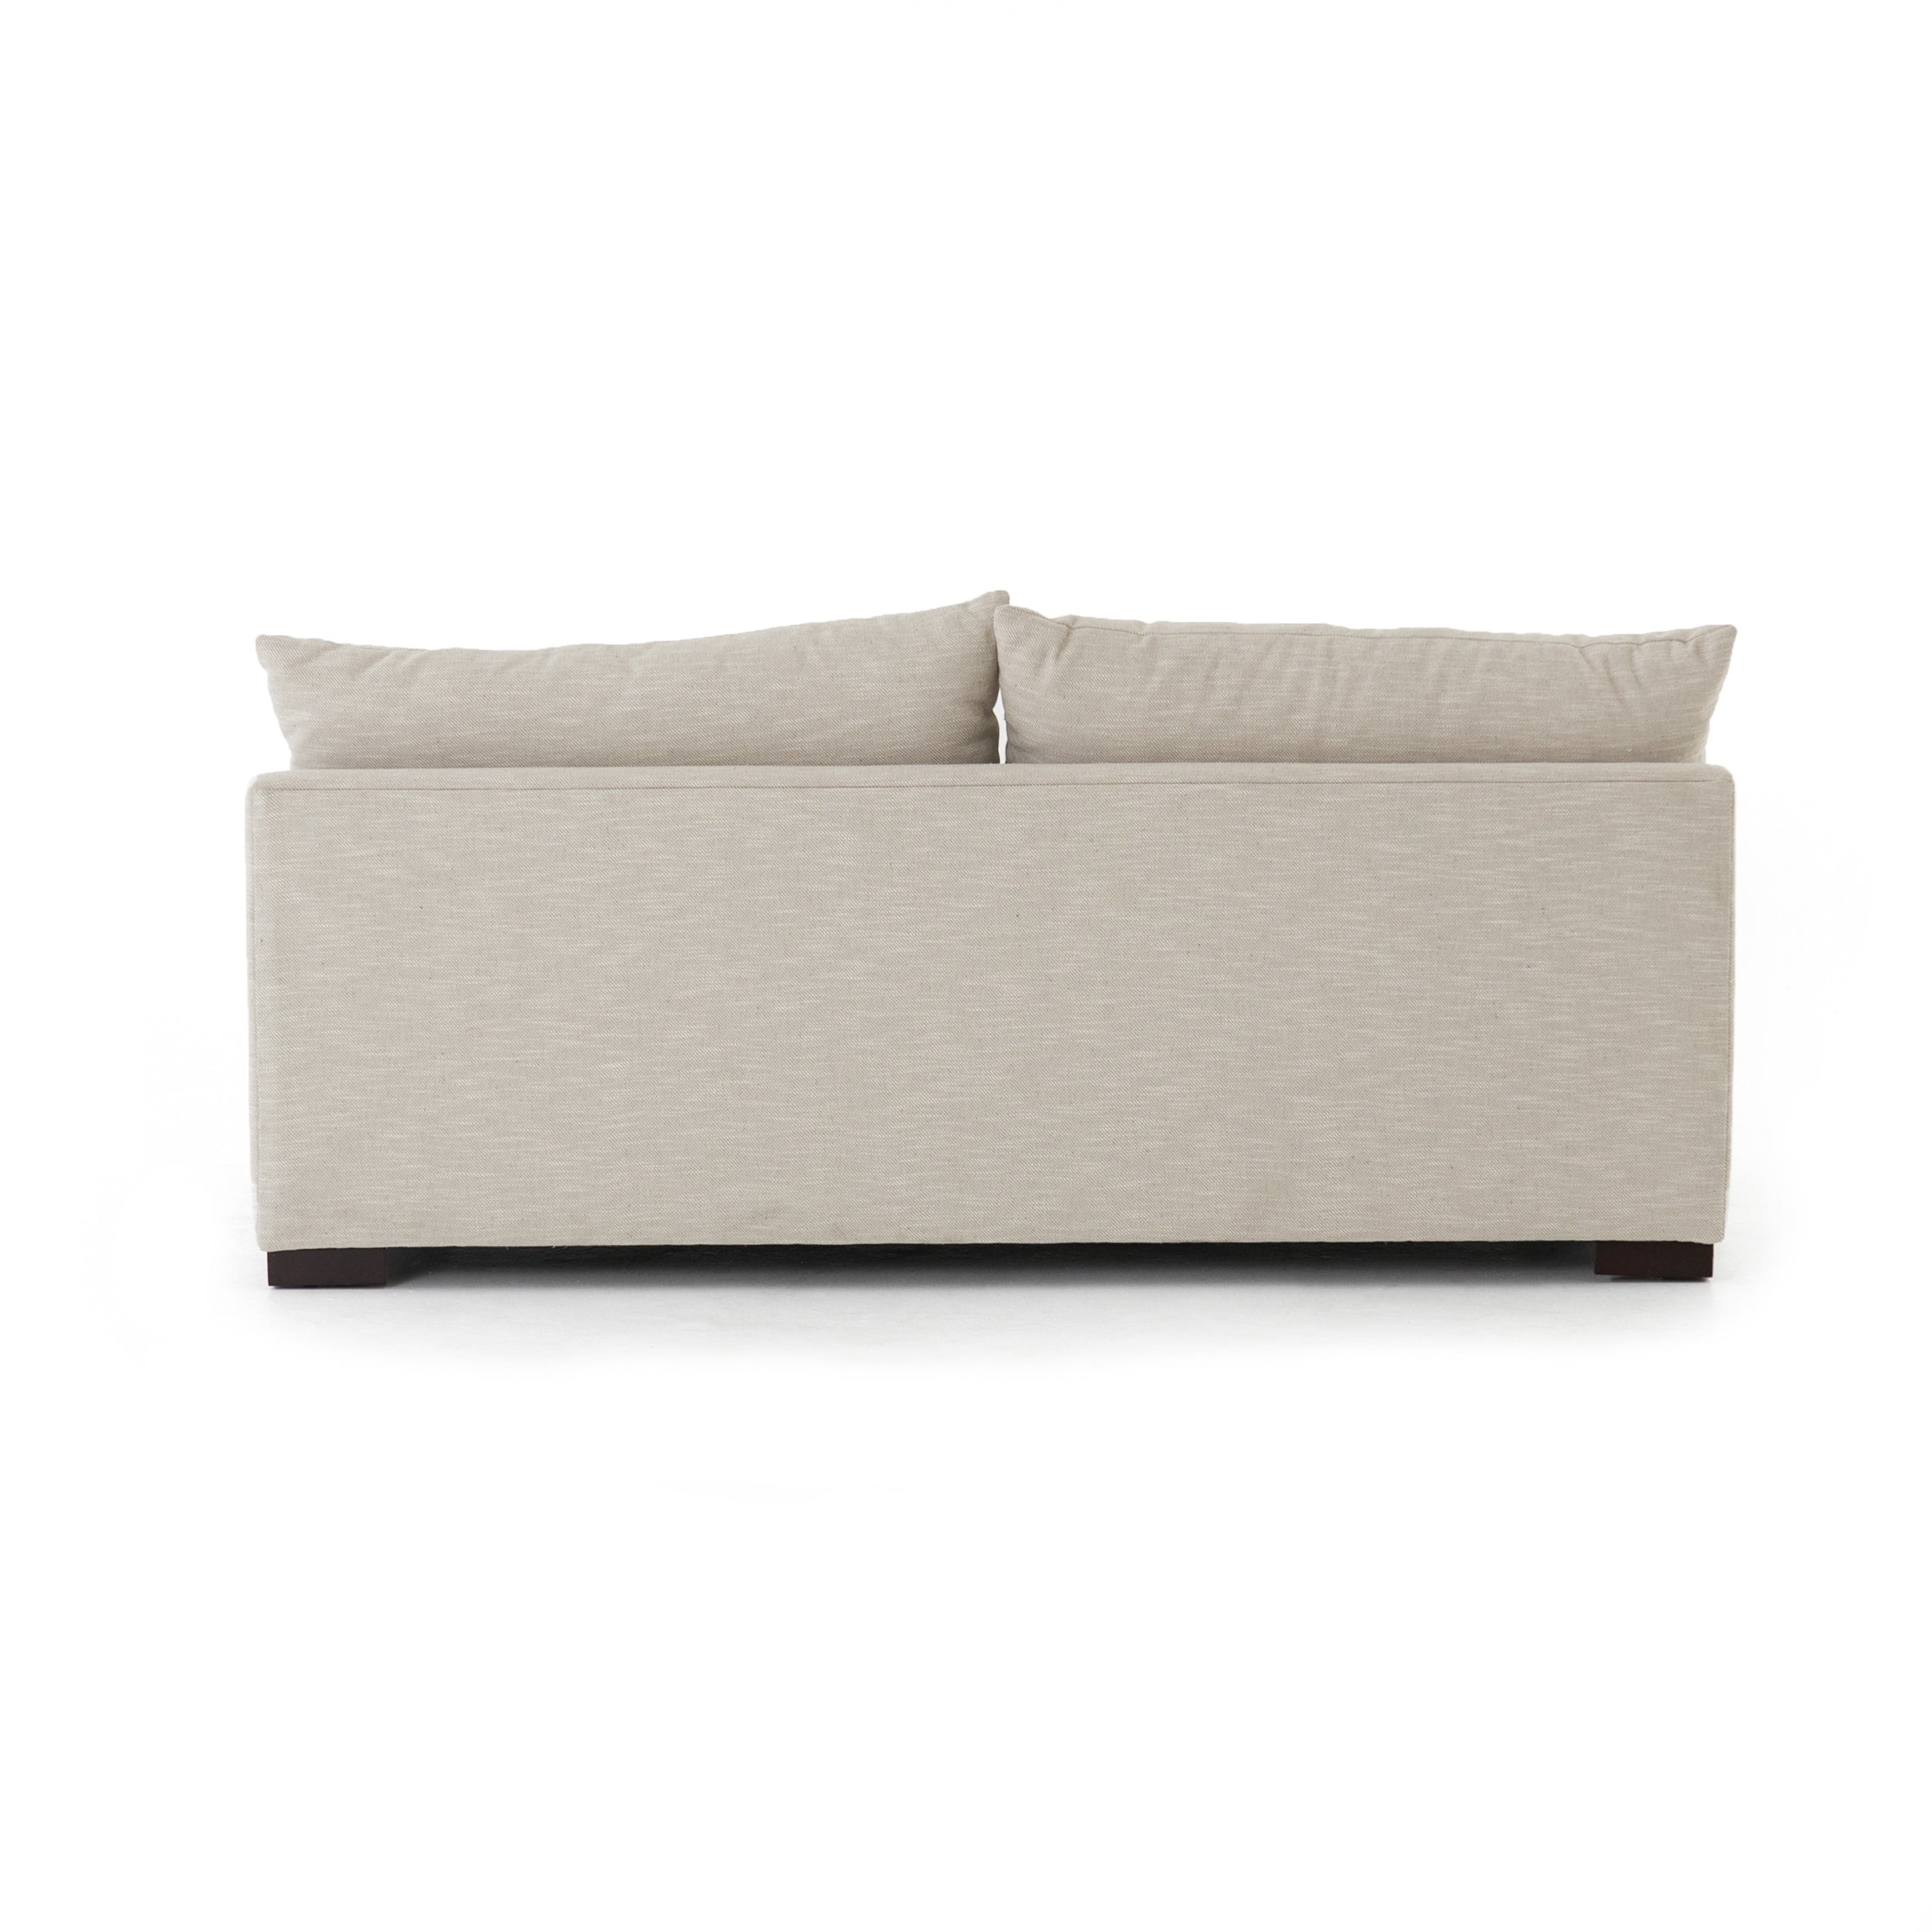 The upholstery of this Grant Armless Piece - Oatmeal is soft, durable, and stain-resistance, making it the perfect choice for families or those who love to cuddle with their furry friends.   Overall Dimensions: 72.00"w x 40.00"d x 31.50"h